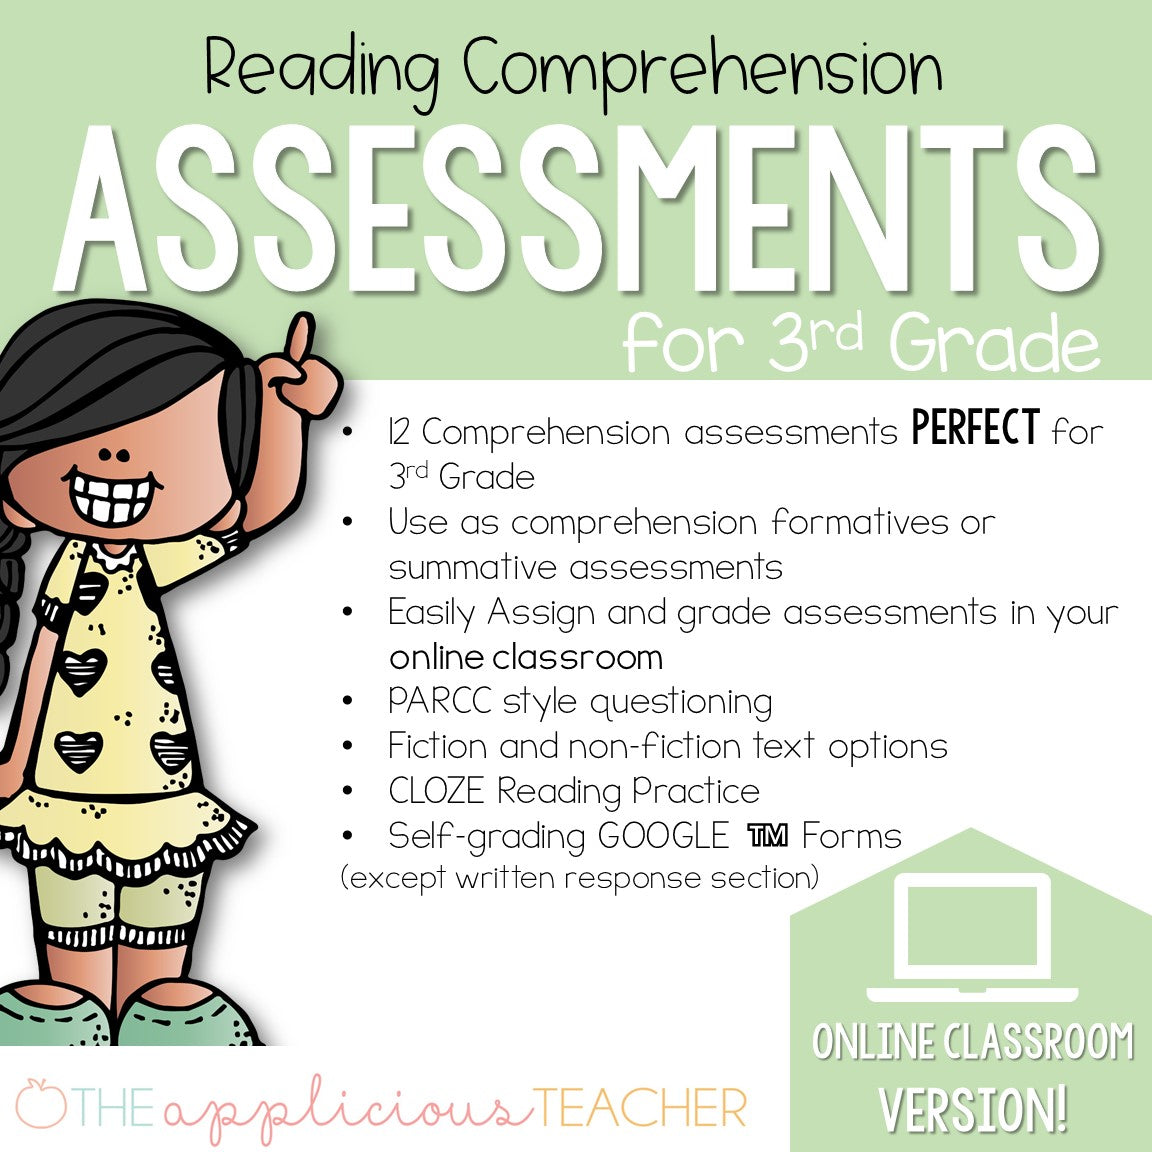 Comprehension　Resource　Teacher　Applicious　Digital　The　Grade　–　Classroom　Tests　Reading　3rd　Store